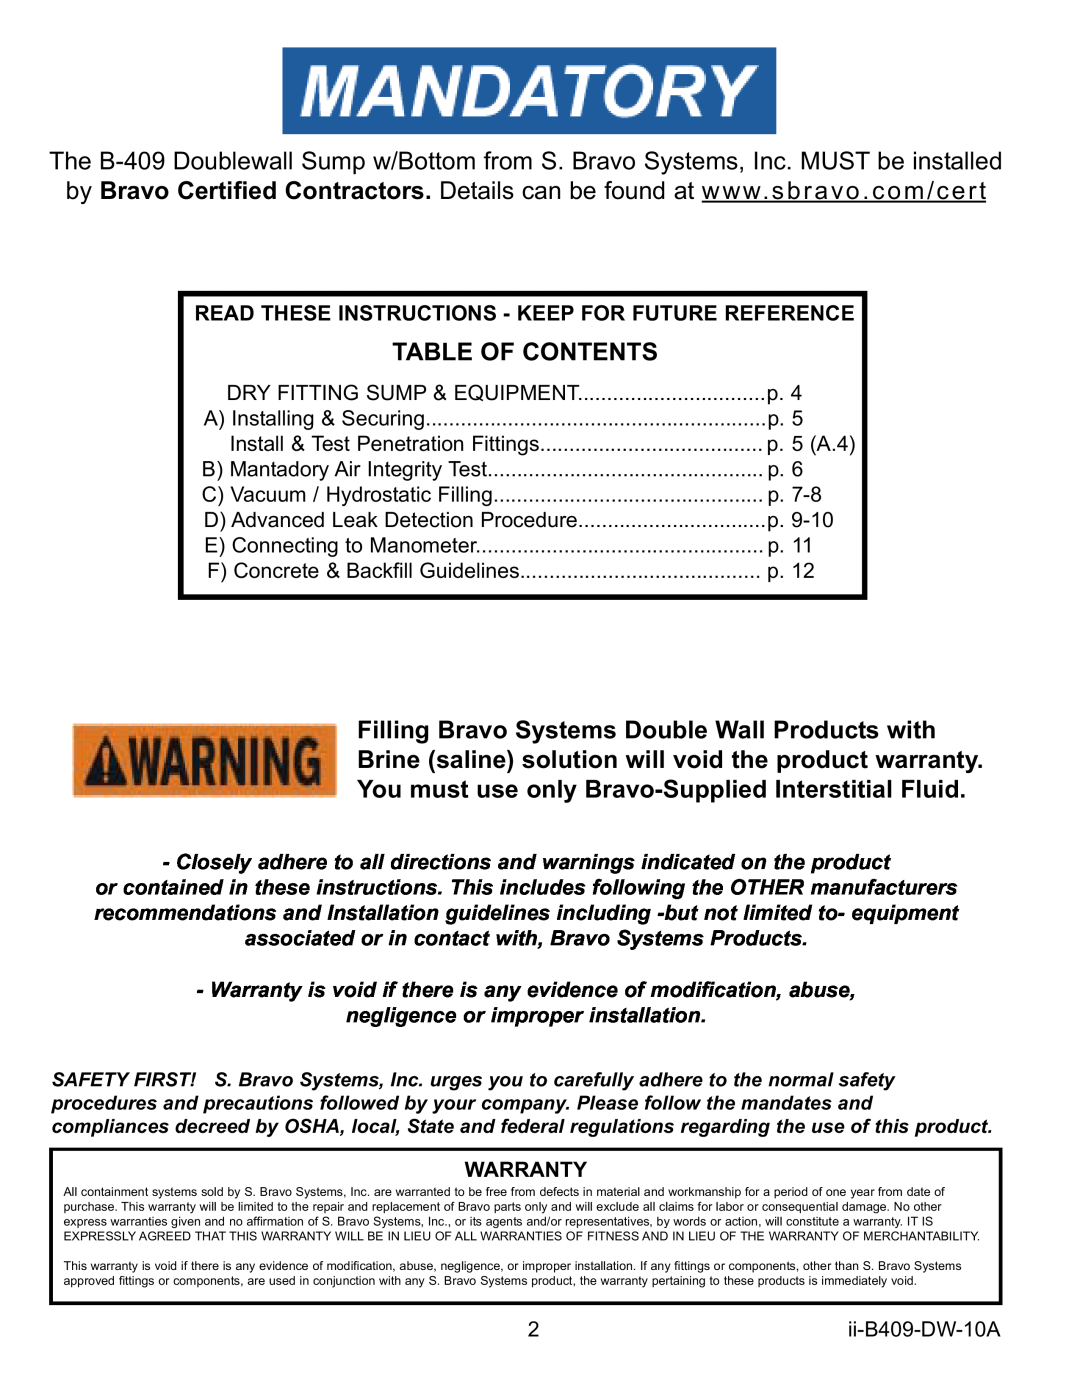 Bravo View B409 installation instructions Table Of Contents, Filling Bravo Systems Double Wall Products with, Warranty 